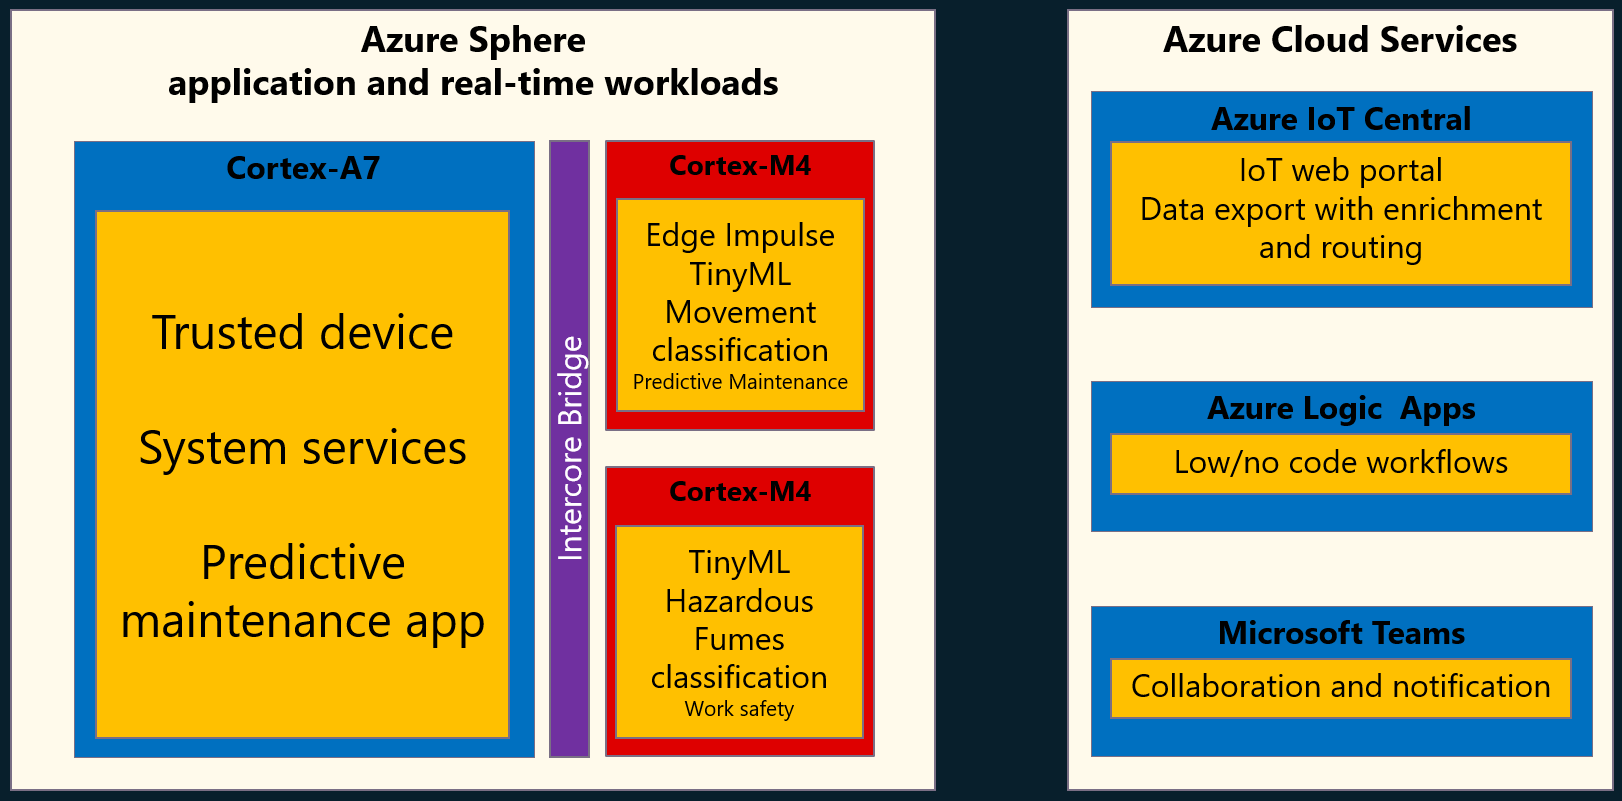 This image shows the predictive maintenance solution architecture